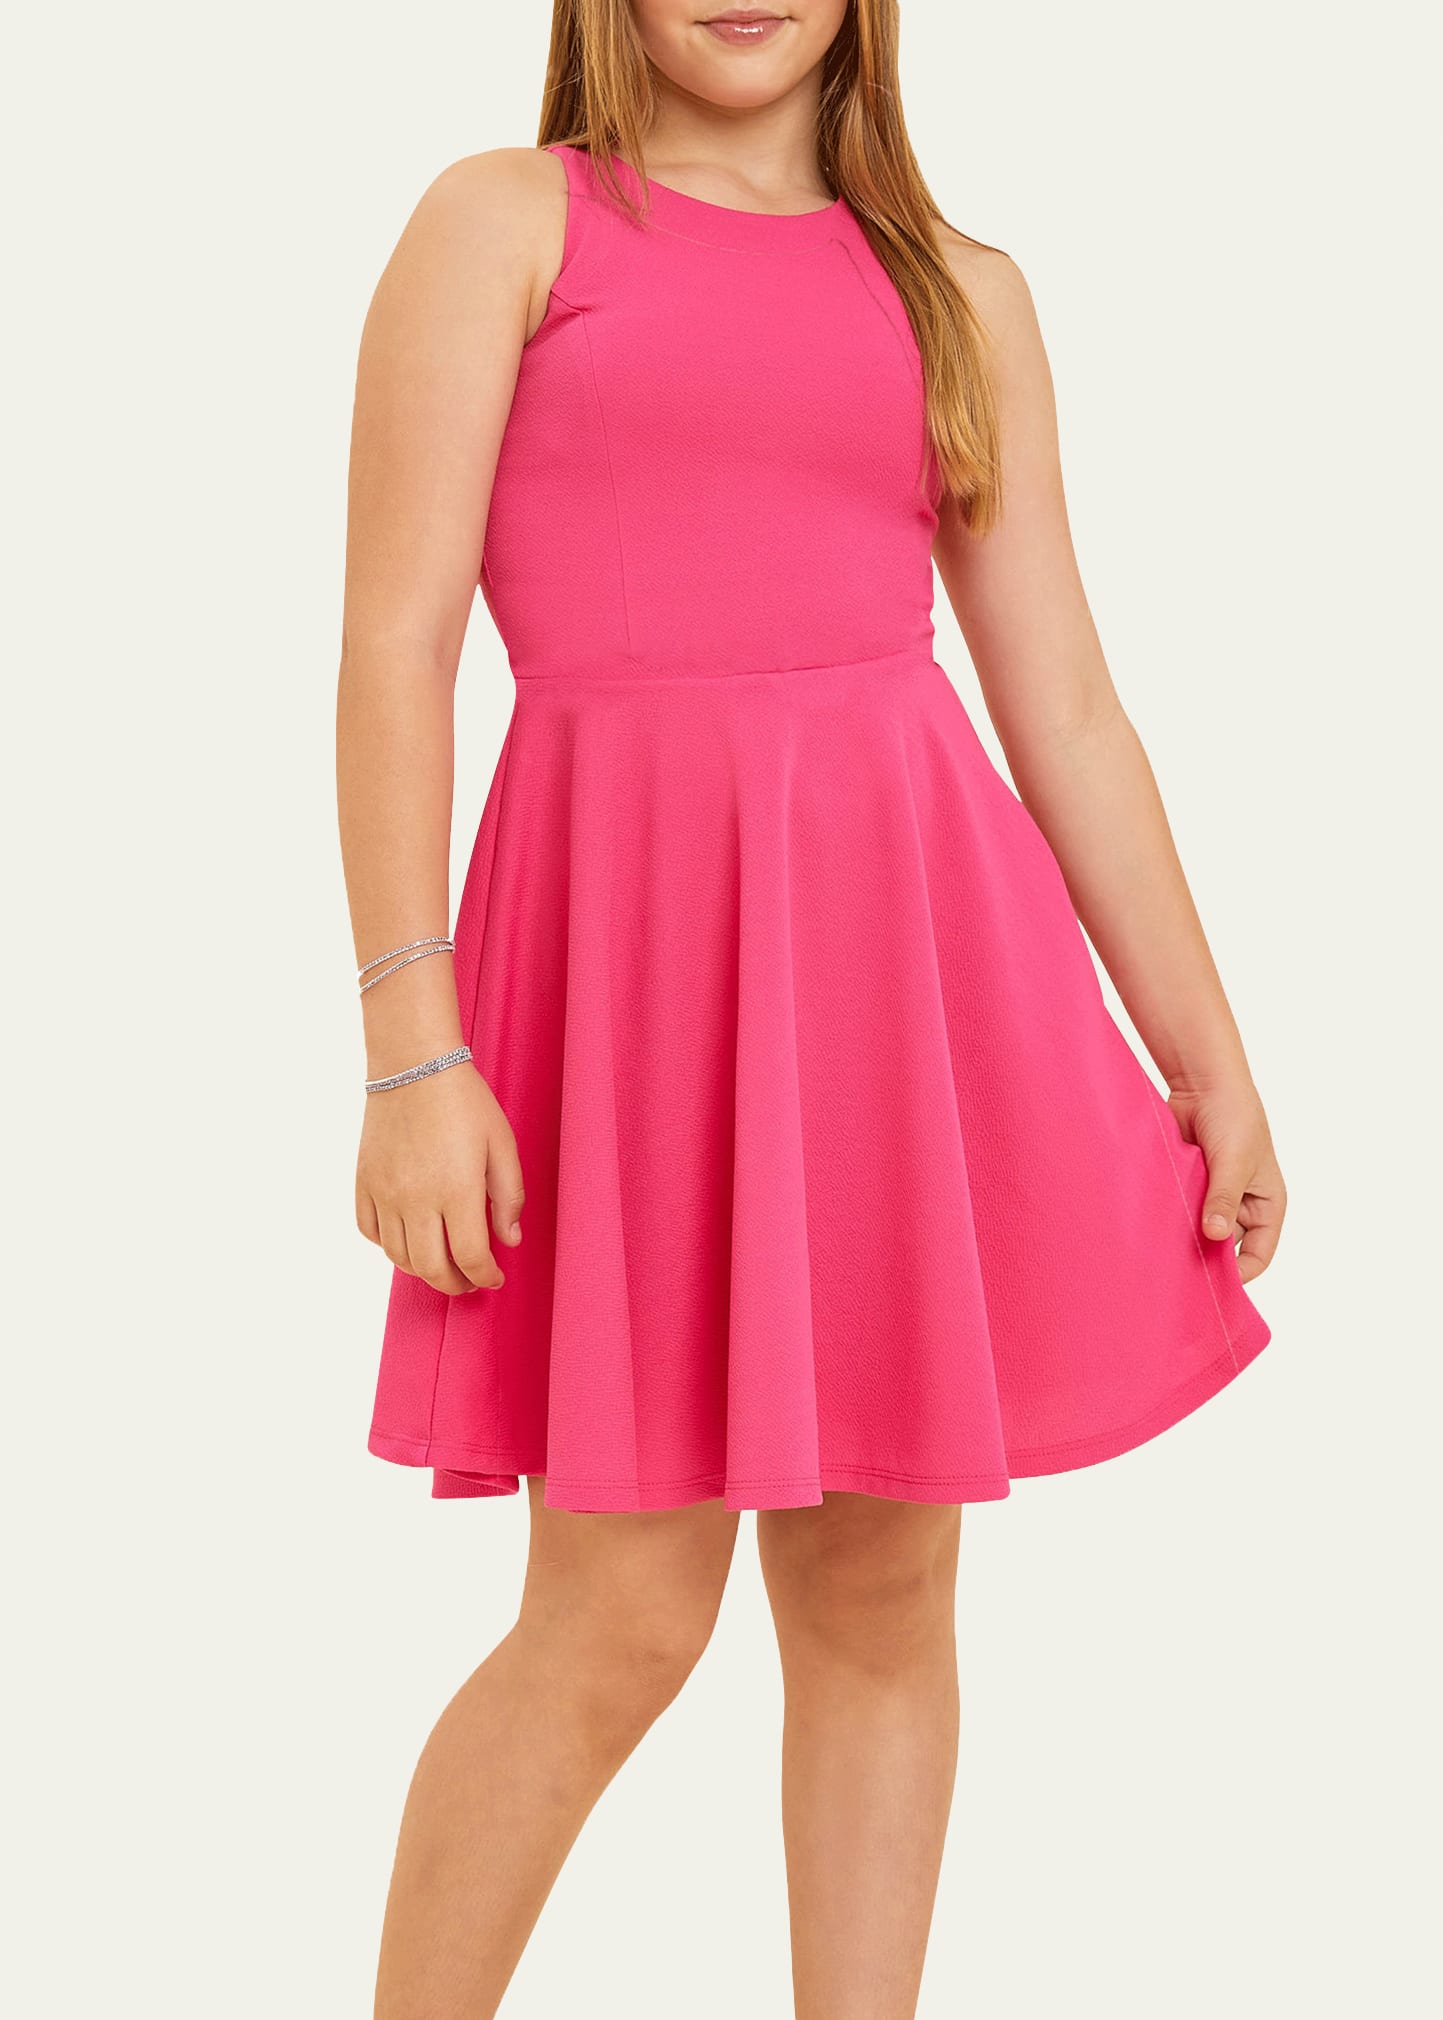 Girl's Sleeveless Fit-and-Flare Dress, Size 8-18